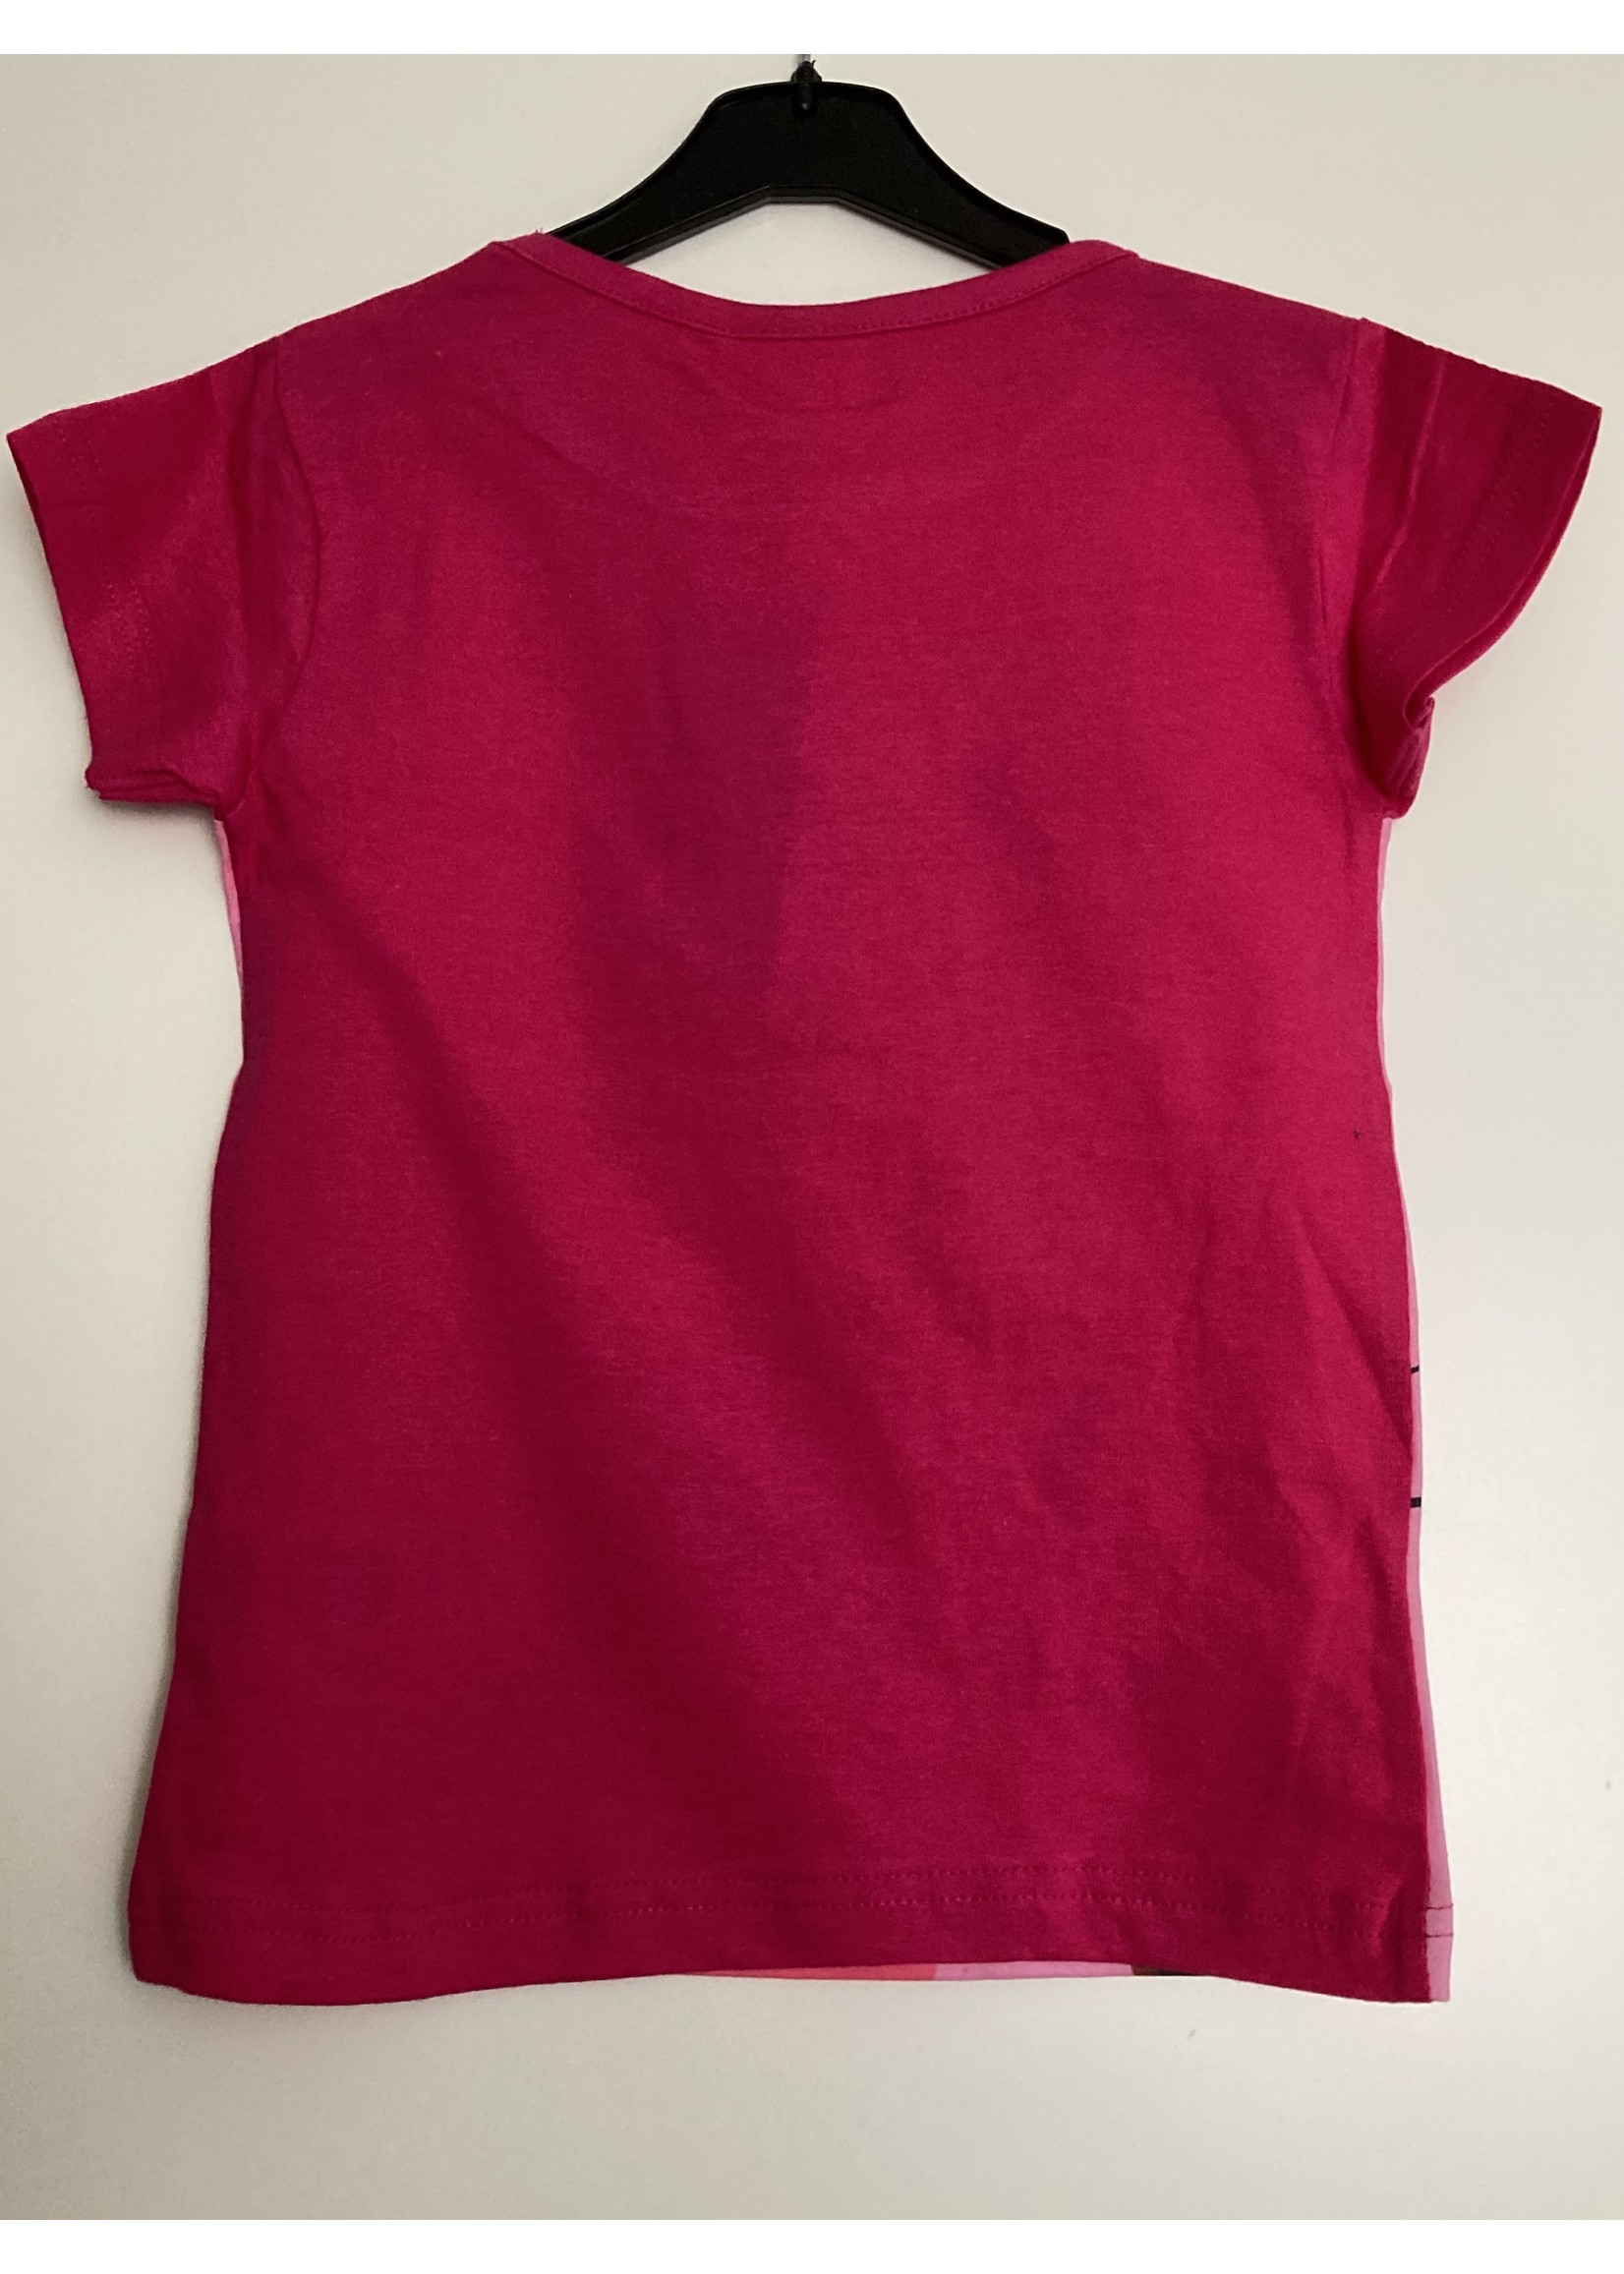 Miraculous Ladybug T-shirt from Miraculous pink